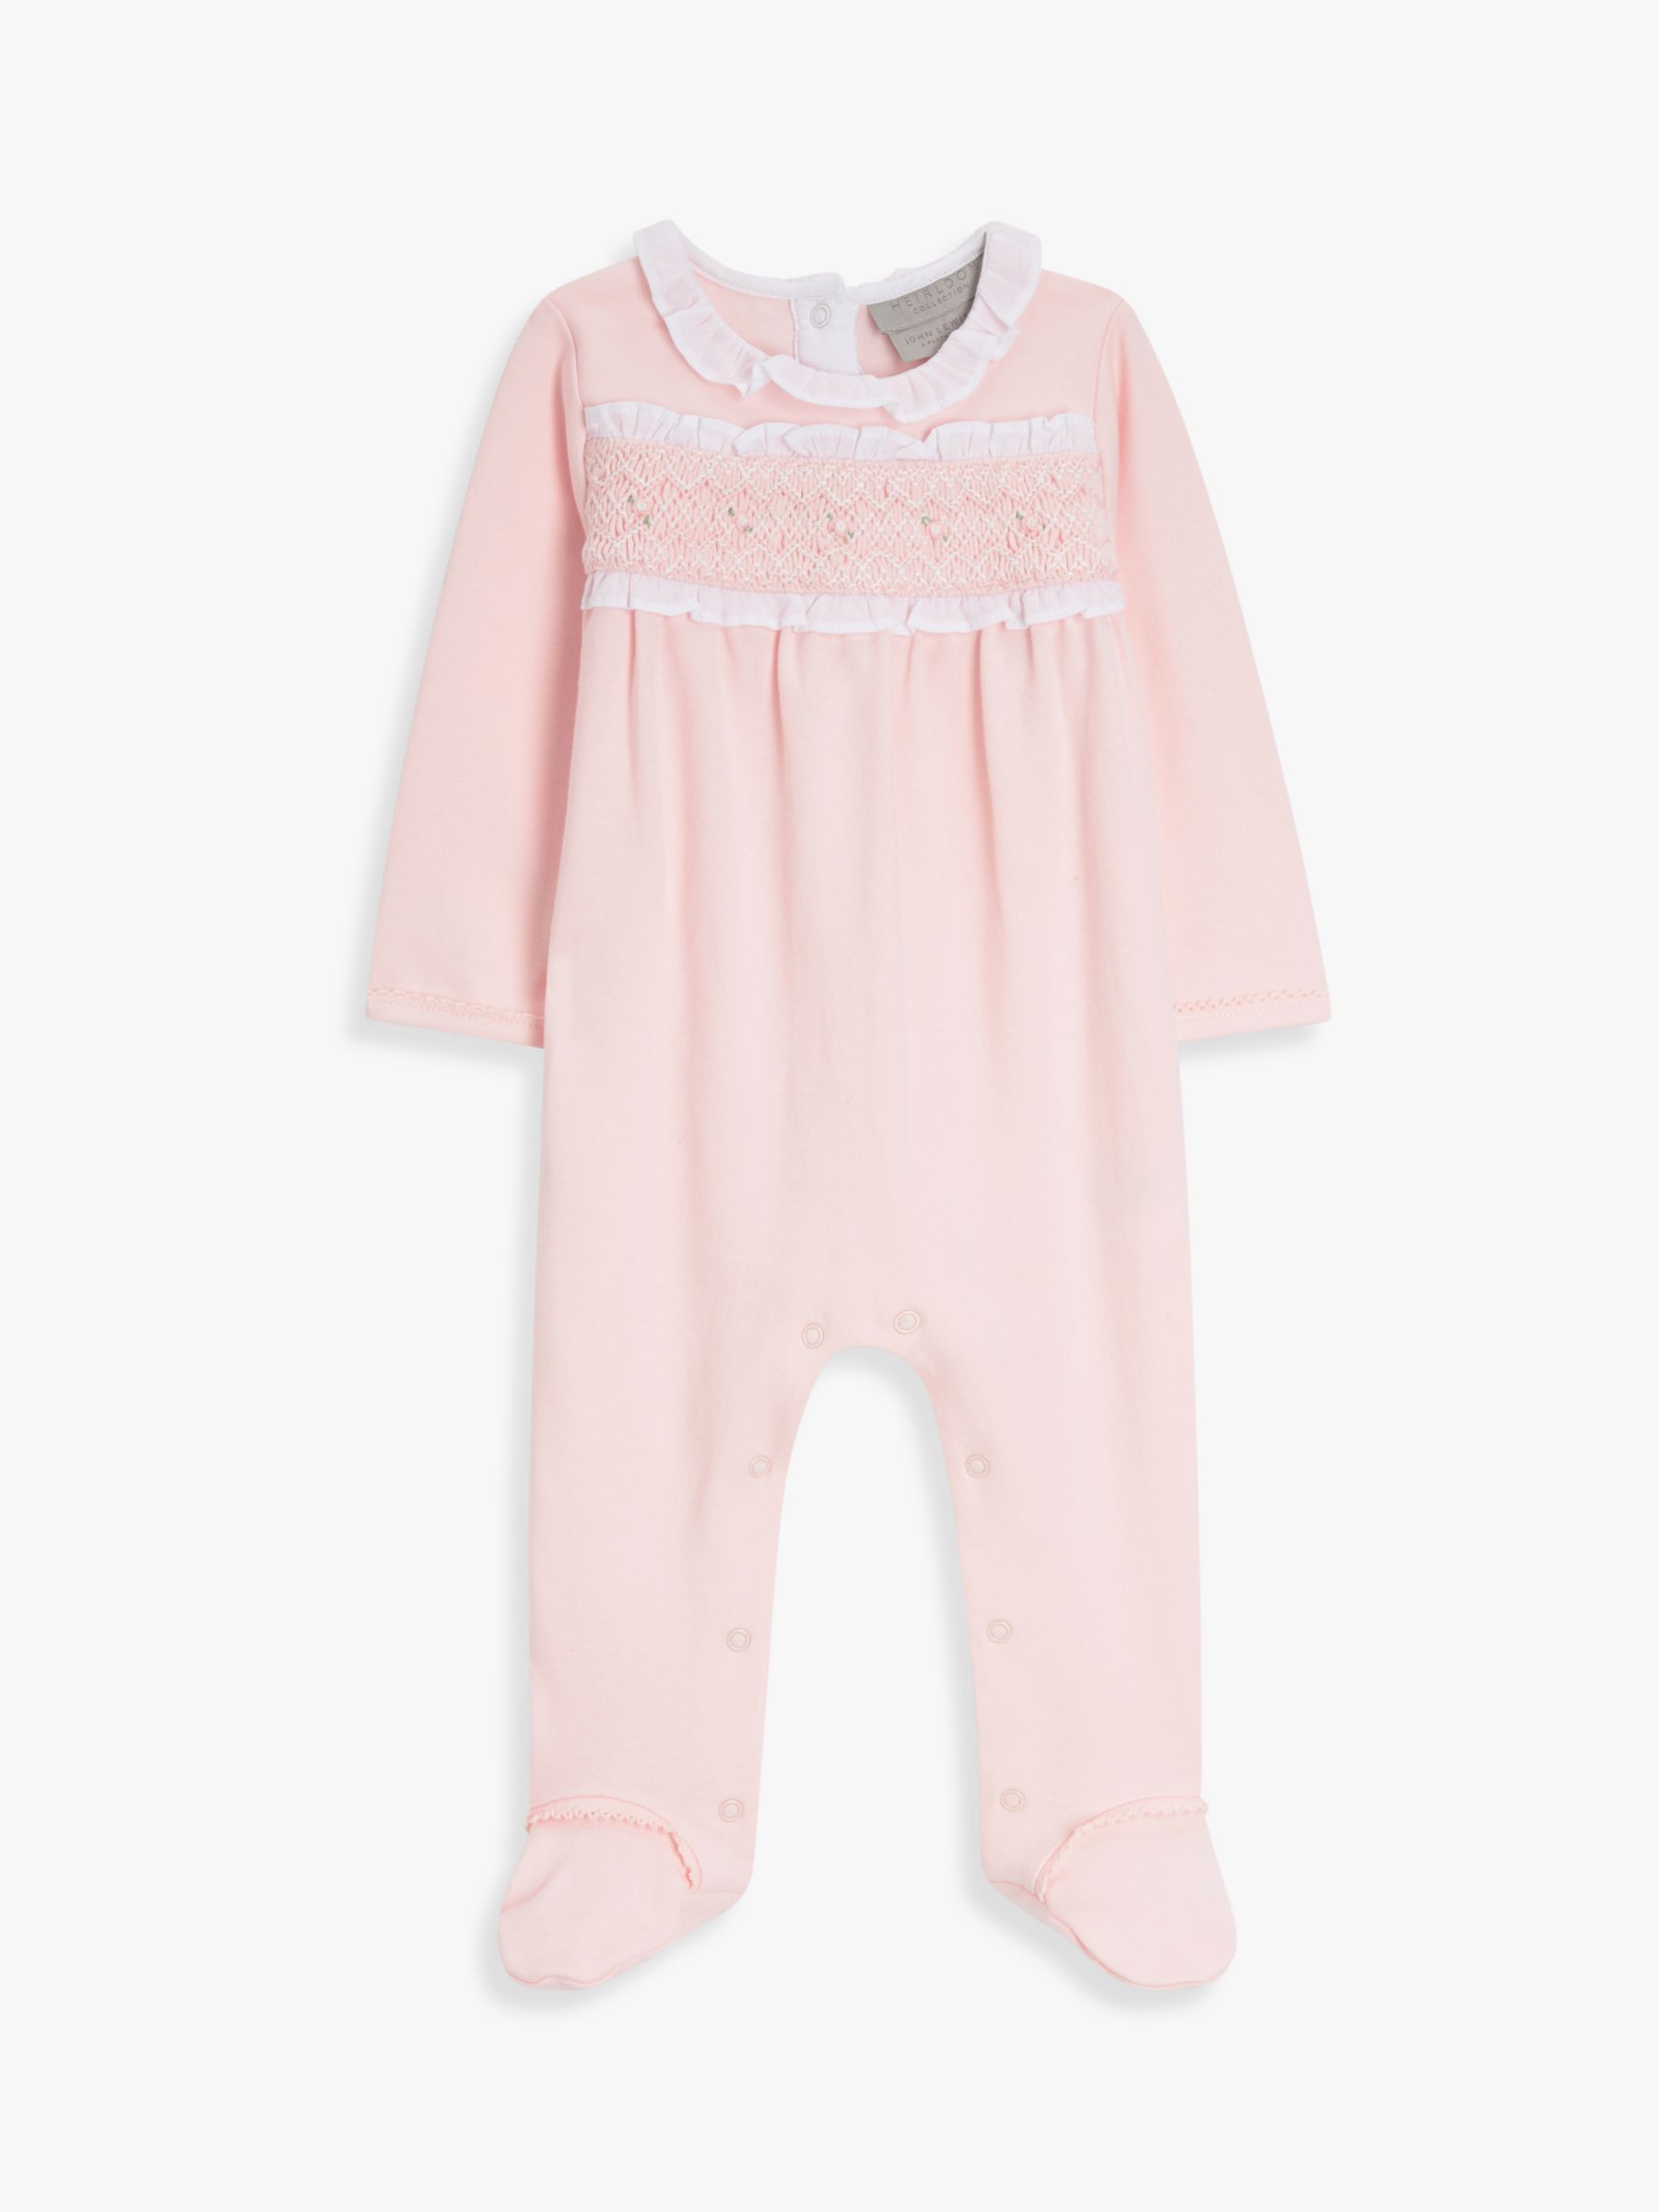 John Lewis Heirloom Collection Baby Pima Cotton Frill Smocked Sleepsuit, Pink, 0-3 months